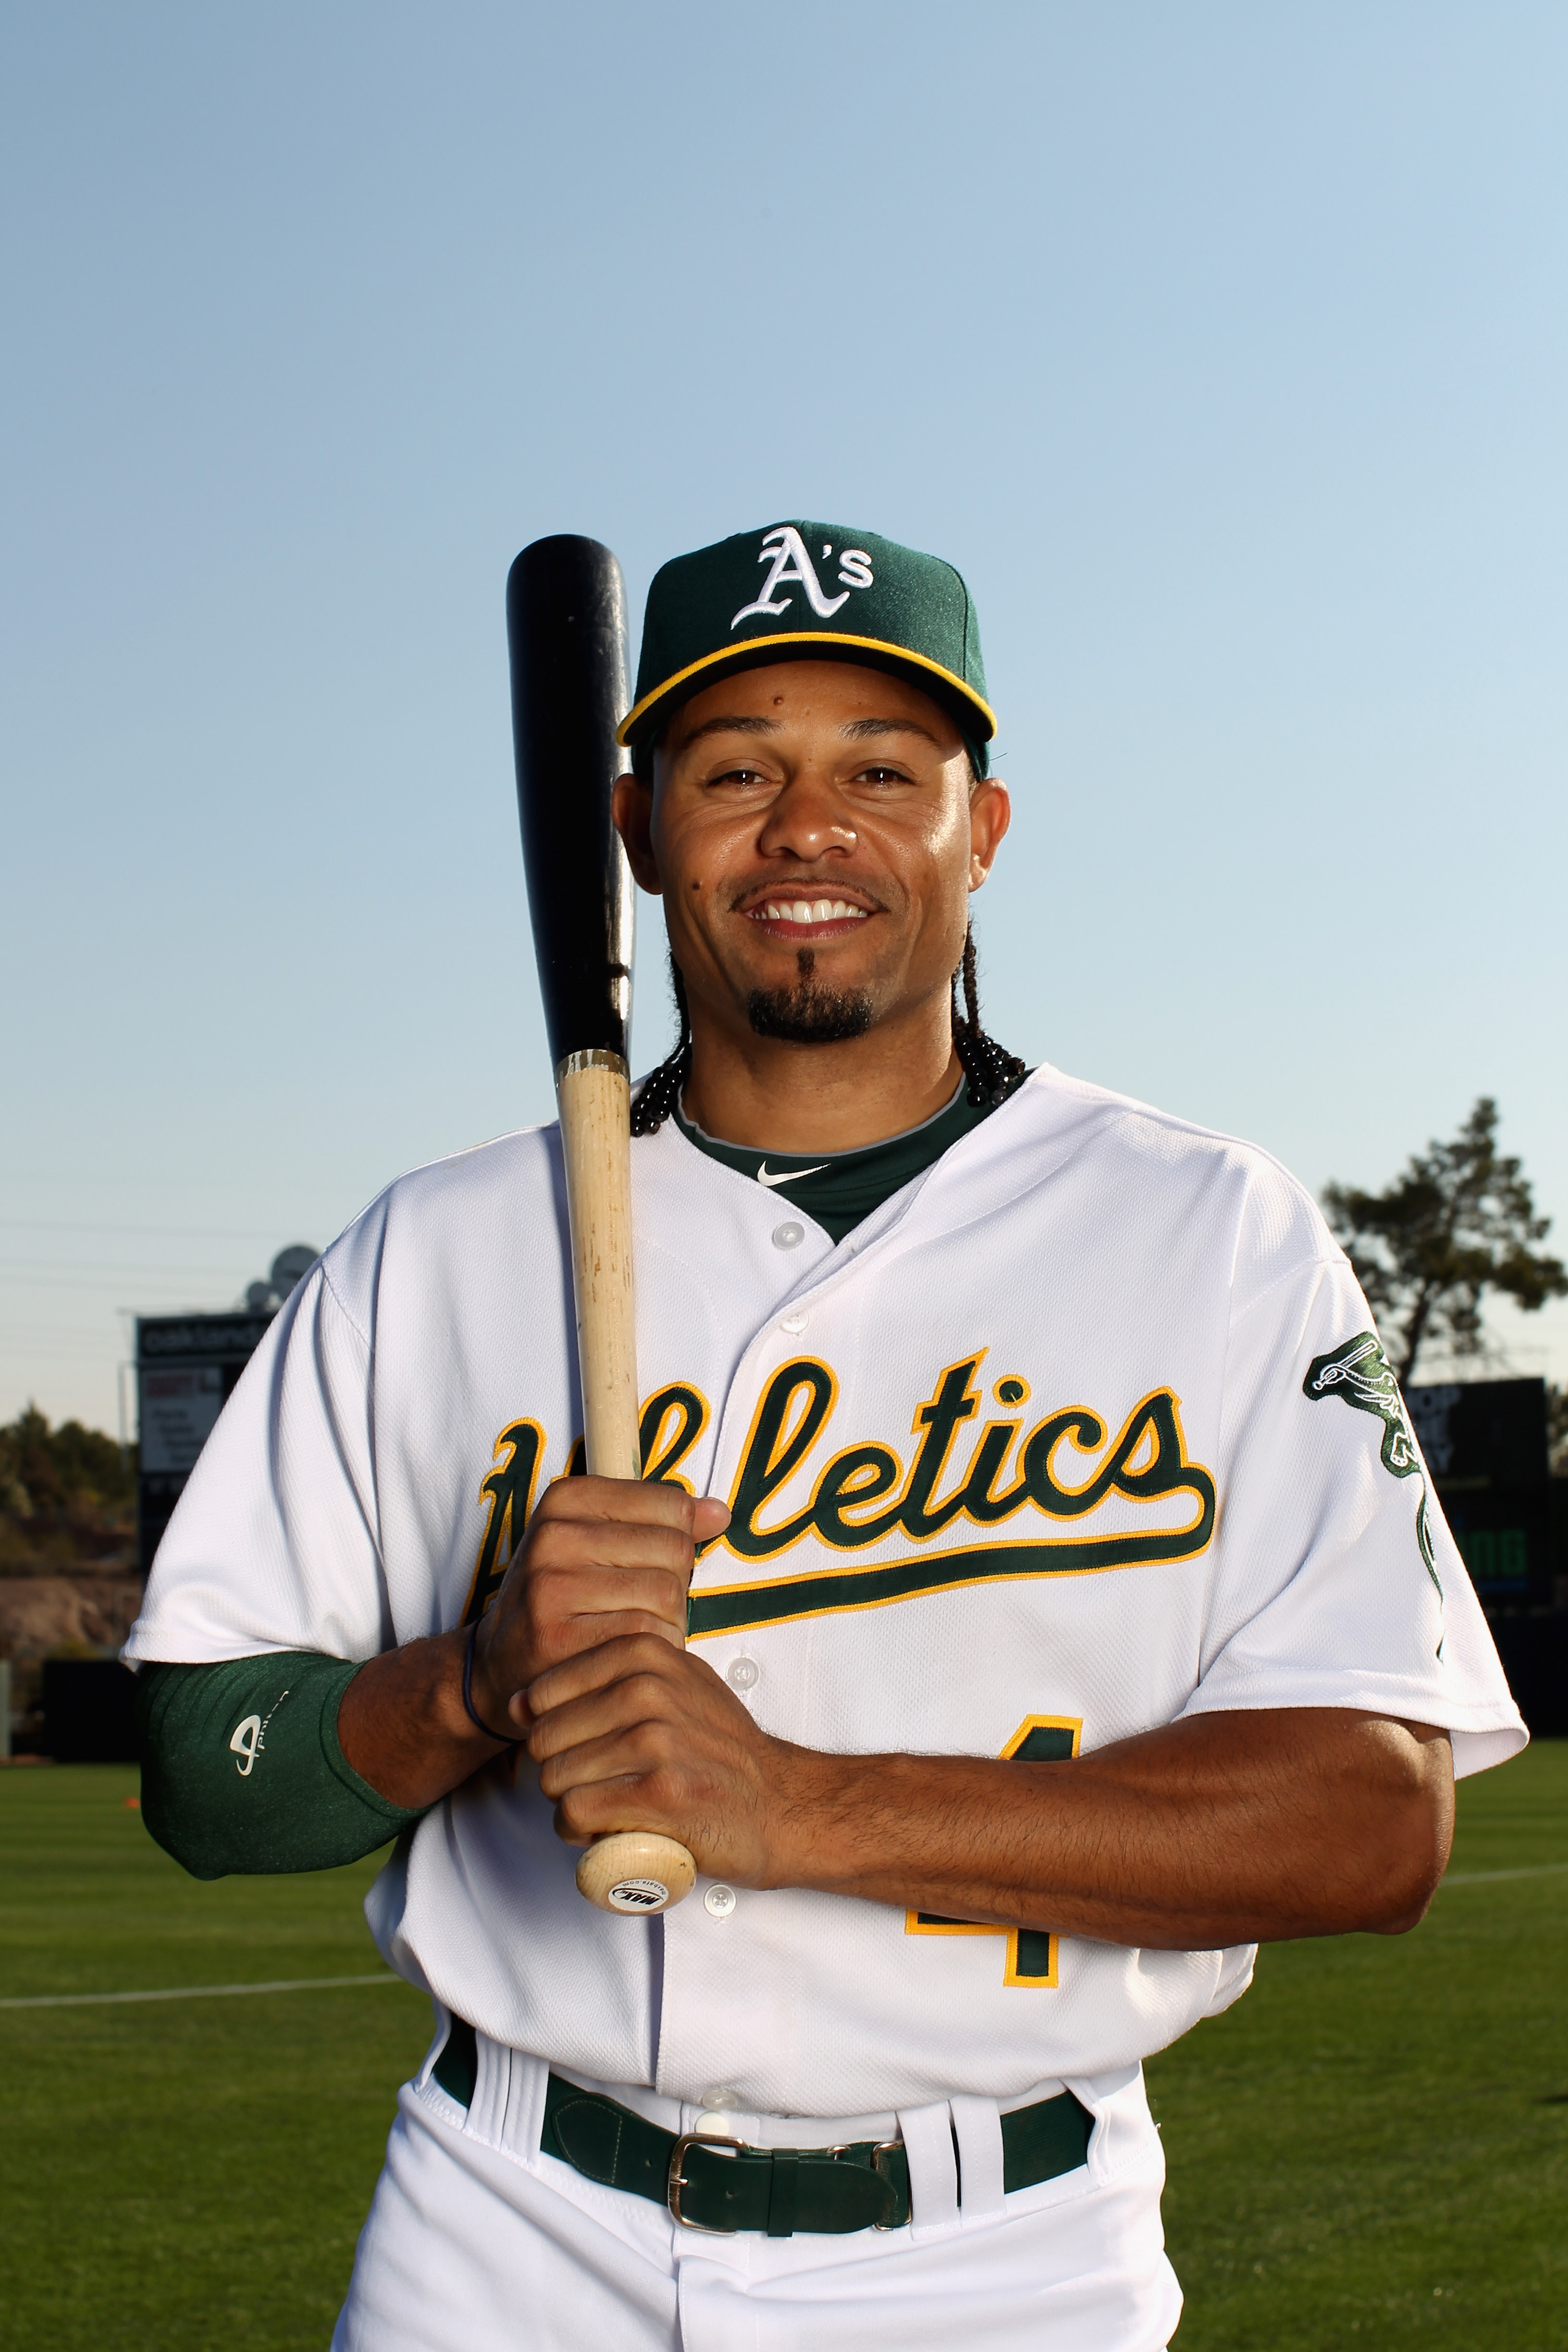 Former Cleveland outfielder Coco Crisp hired into Nationals player